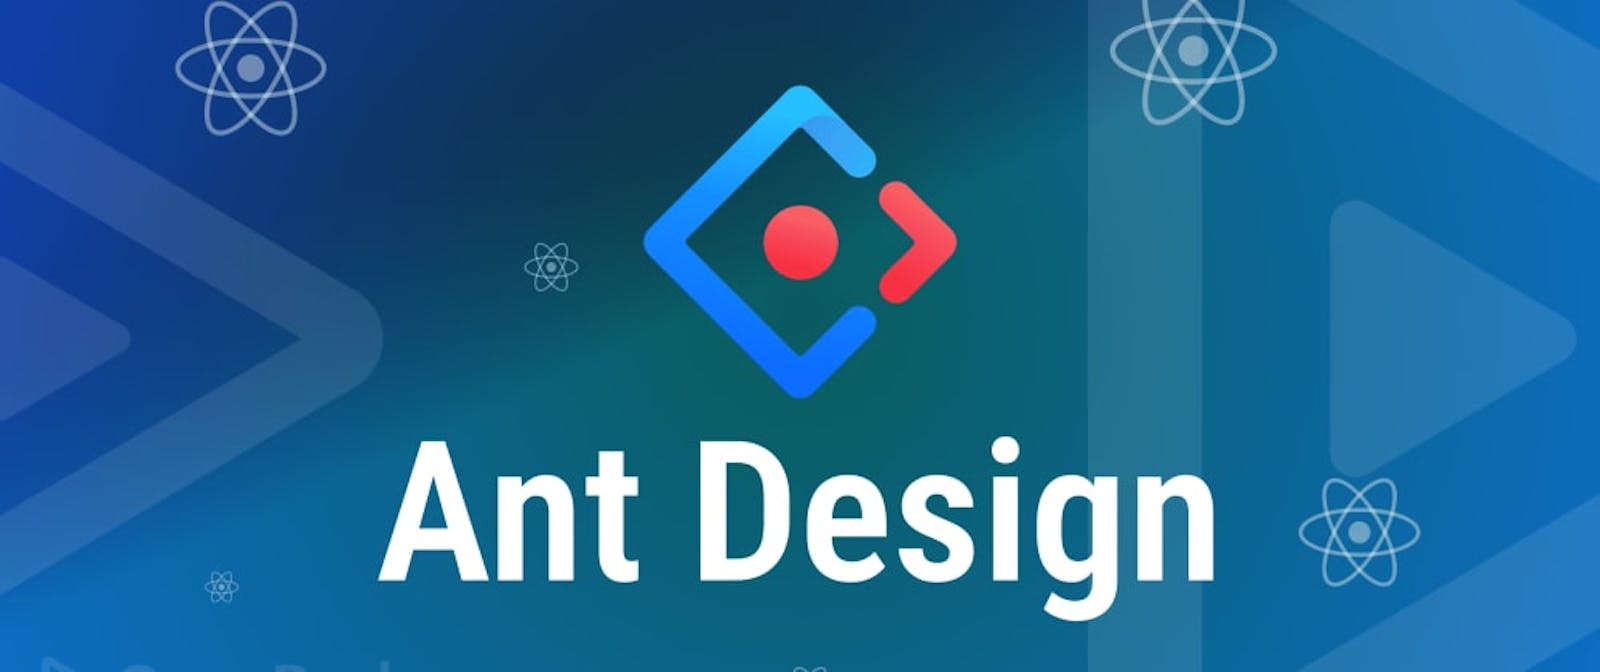 Building React components using Ant Design